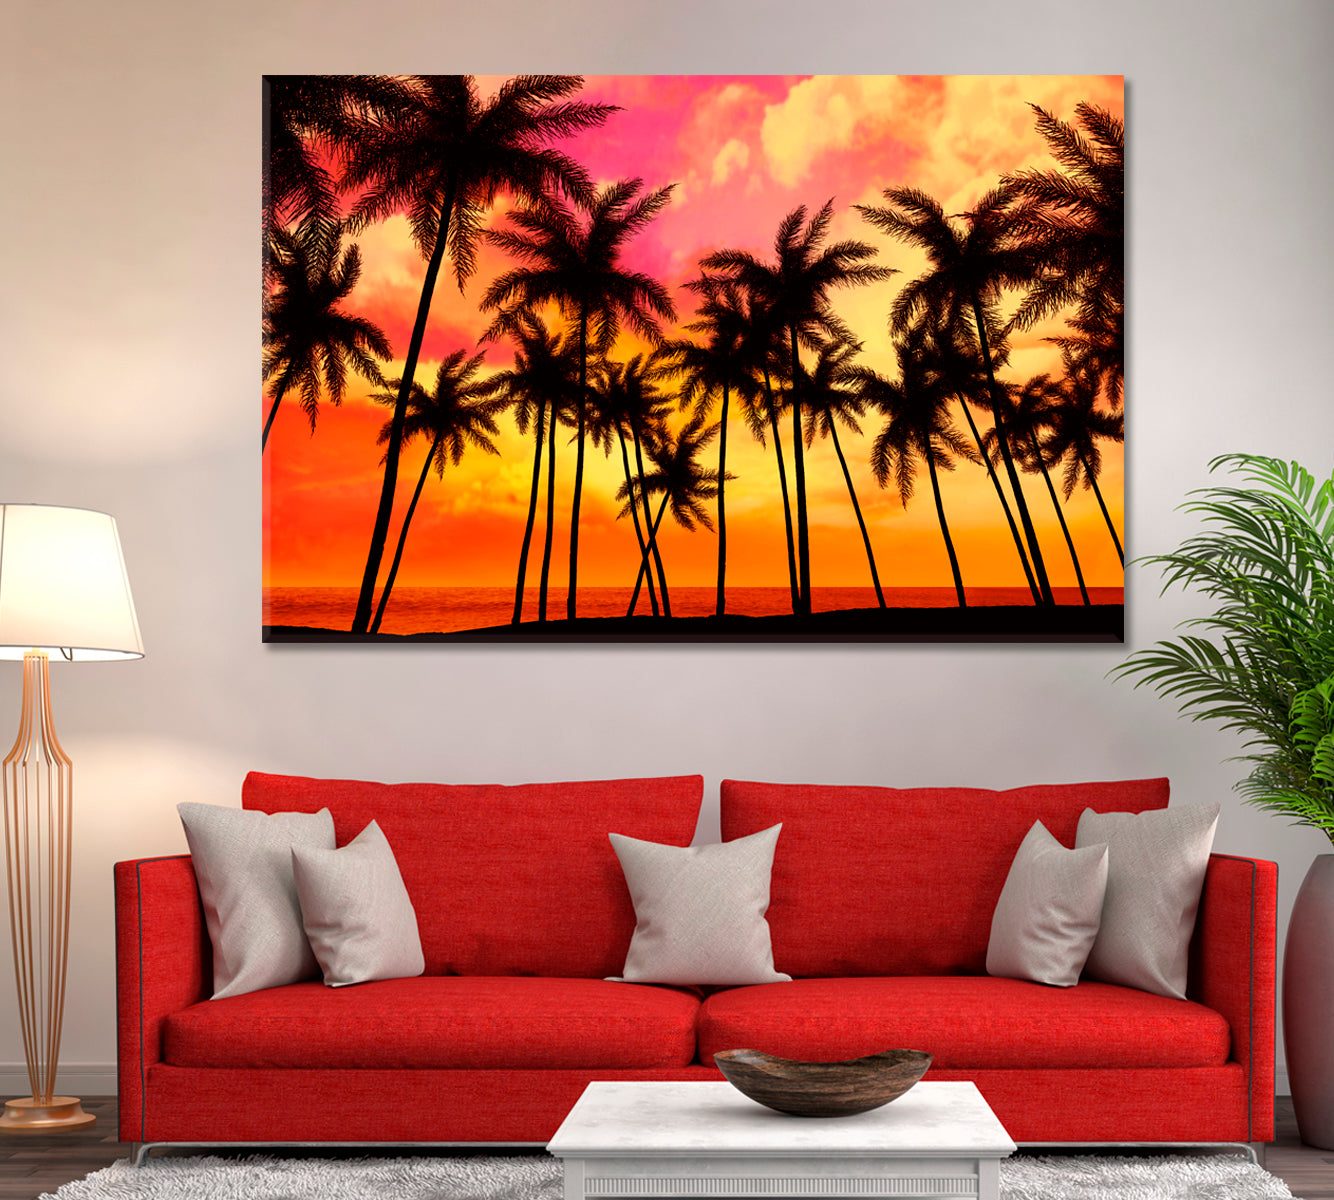 Palms at Sunset Canvas Print ArtLexy 1 Panel 24"x16" inches 